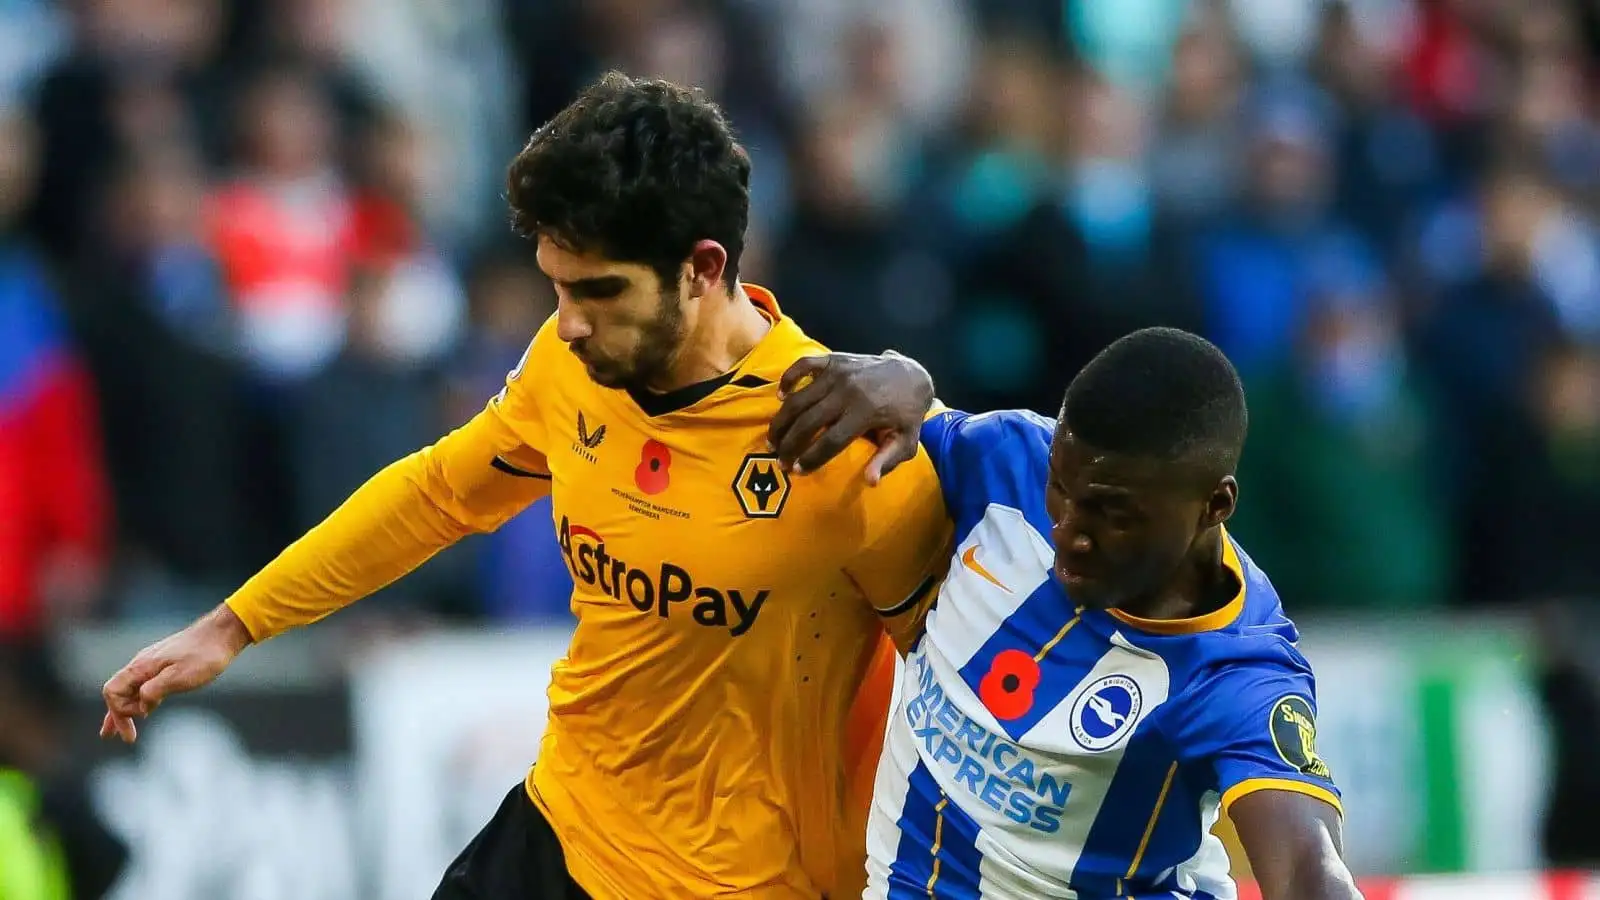 Wolverhampton Wanderers' Goncalo Guedes and Brighton and Hove Albion's Moises Caicedo